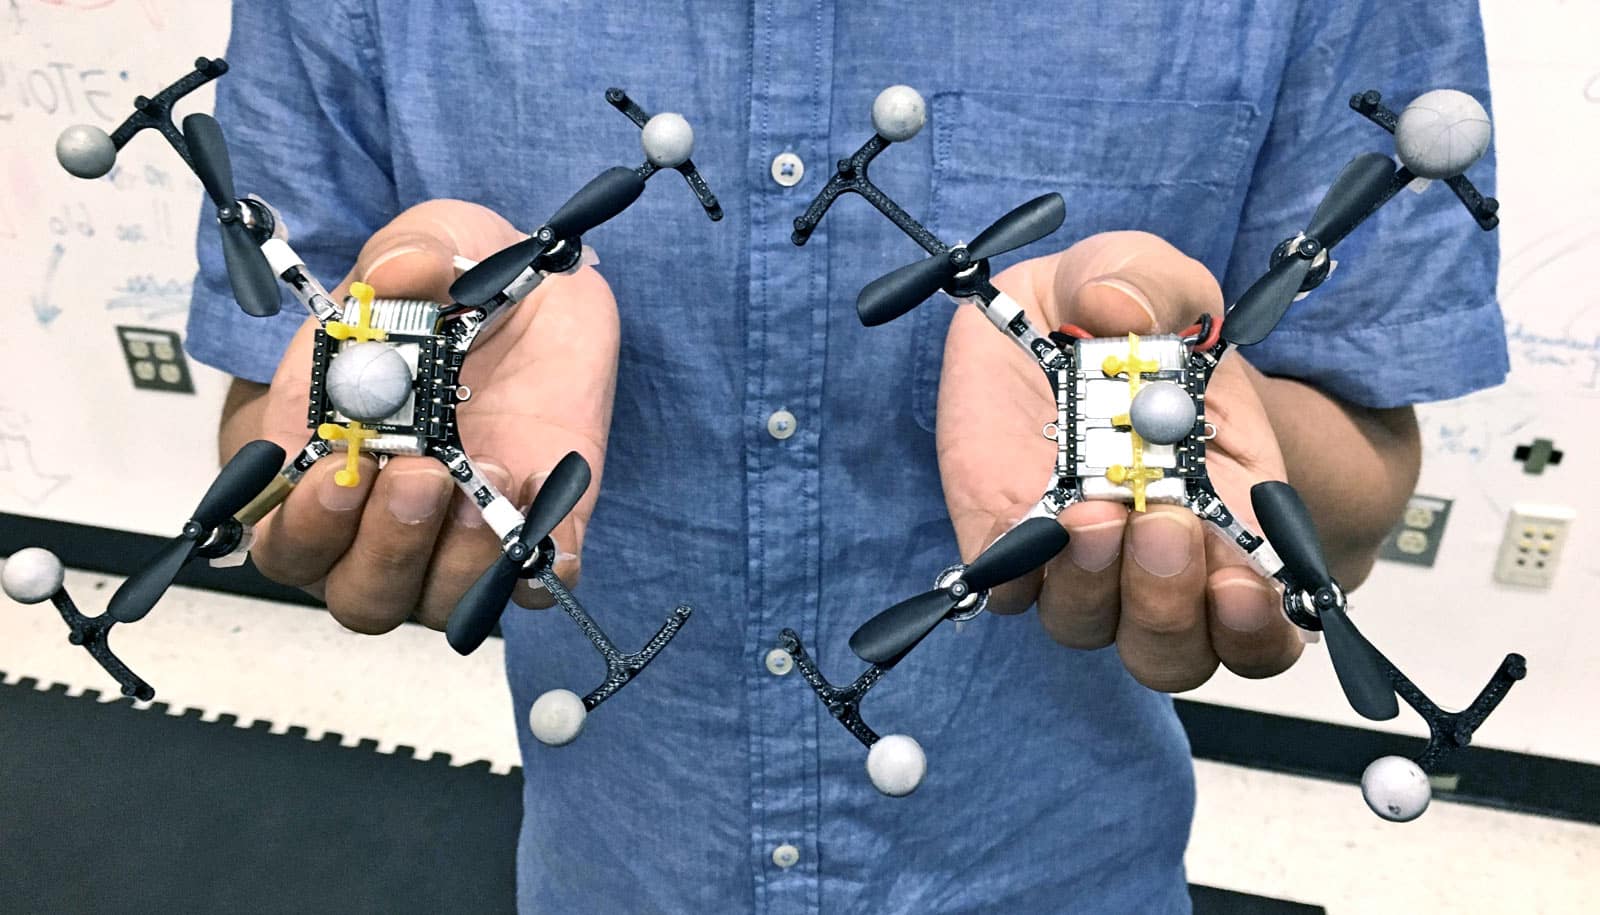 hands hold flying robots